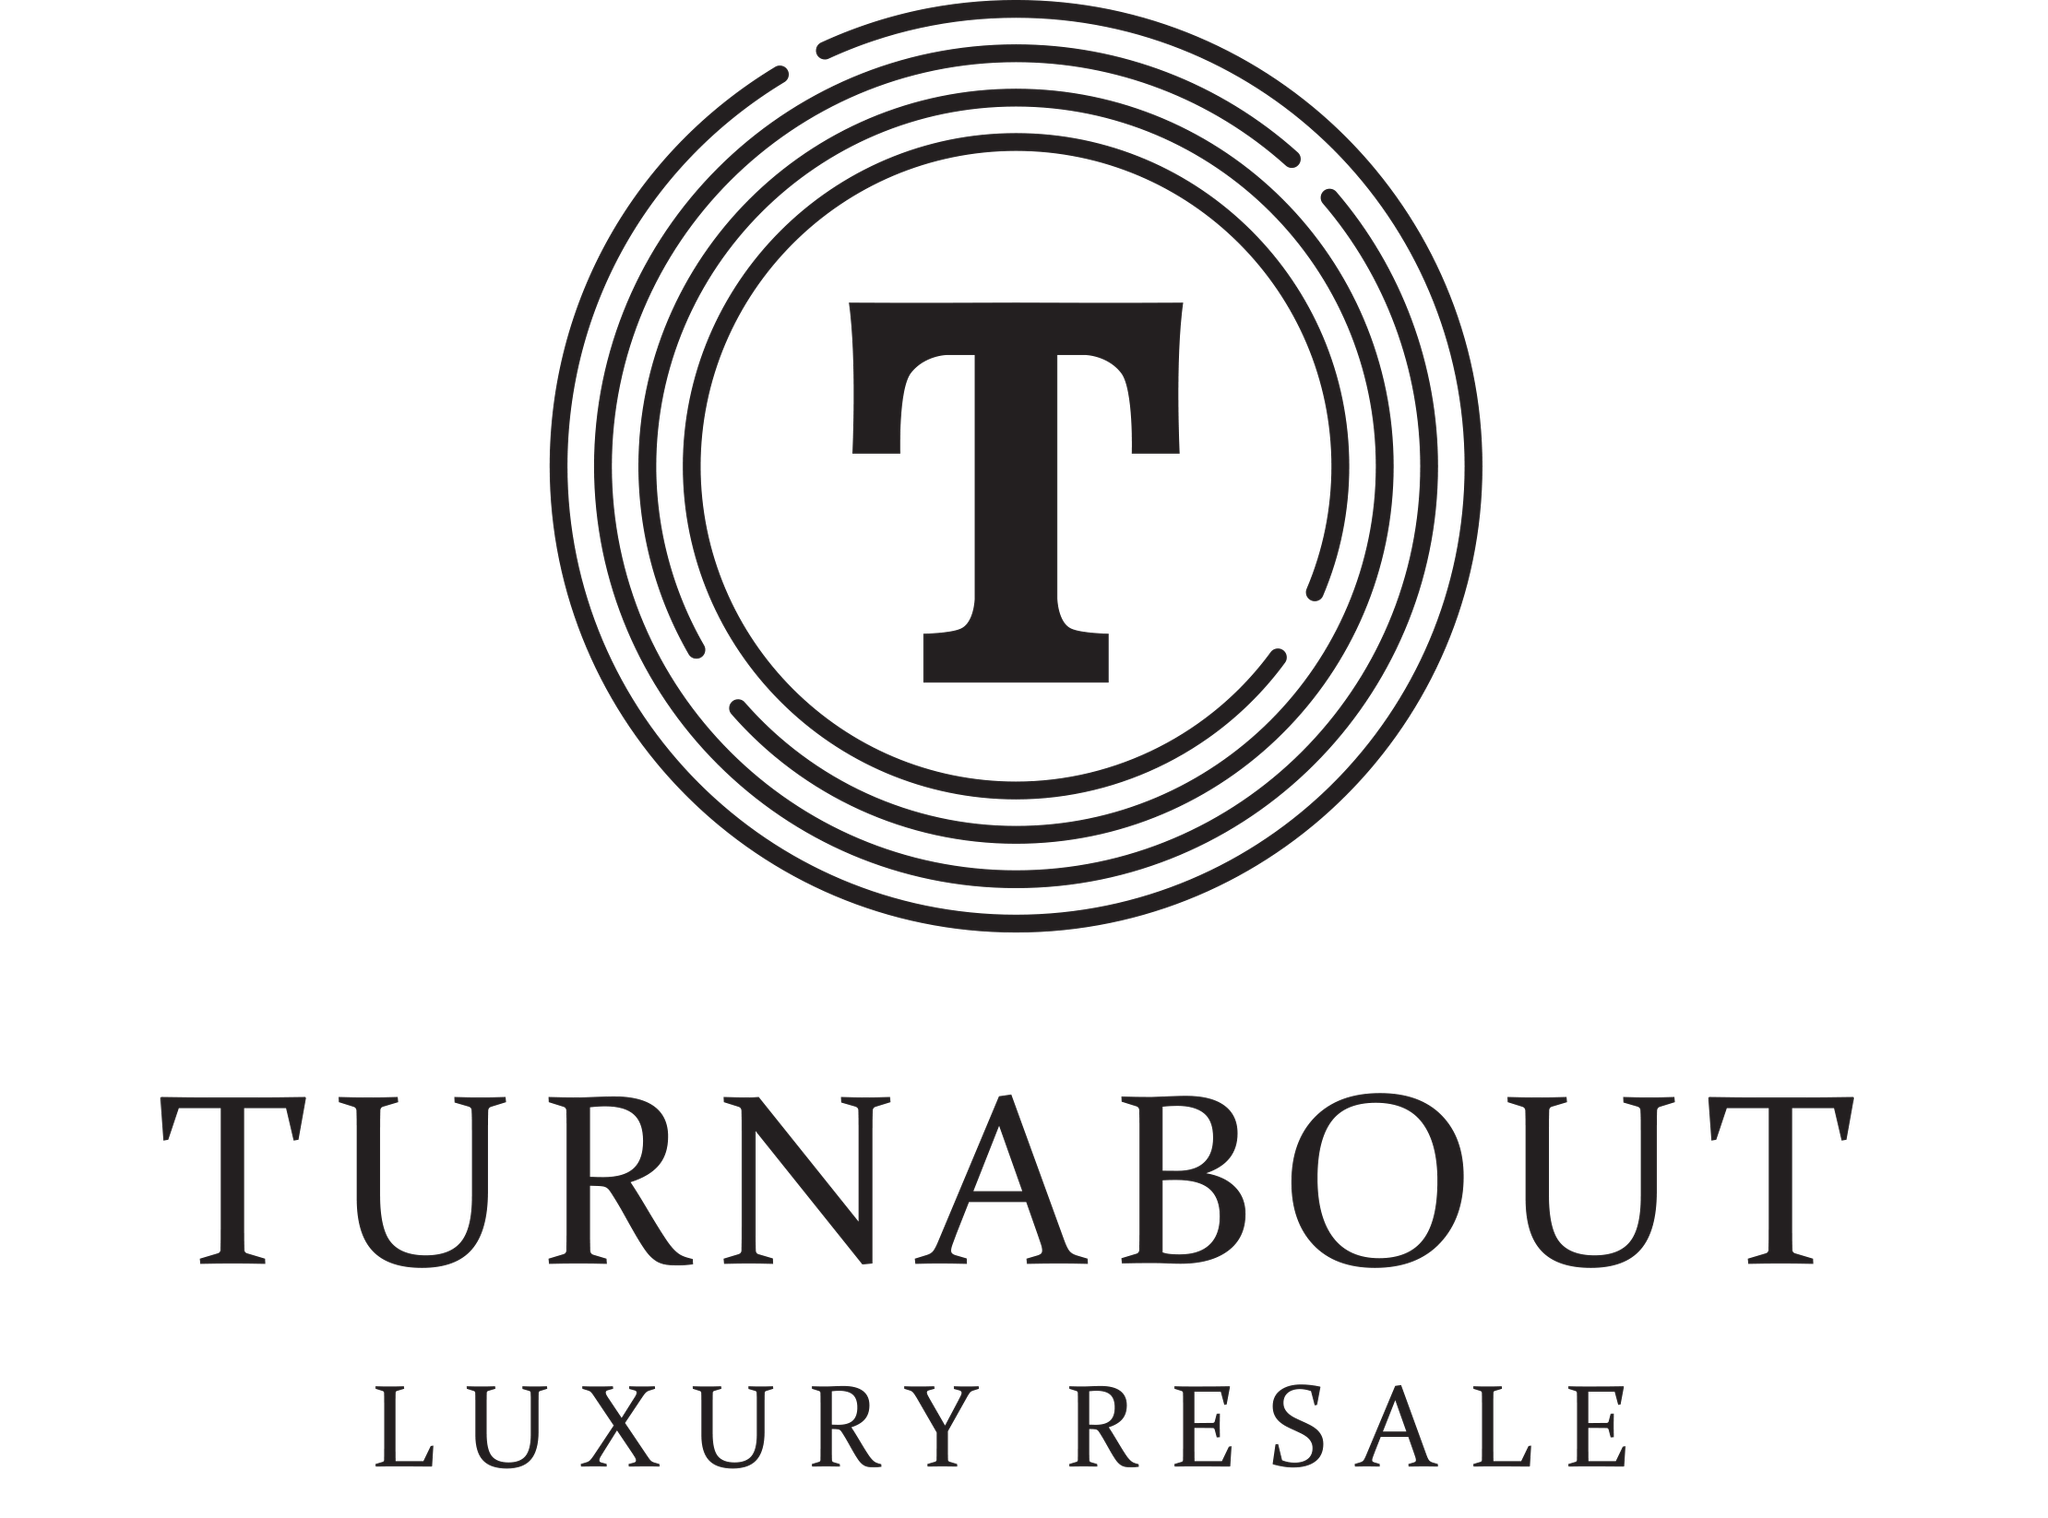 Turnabout-Logo-Black_preview-copy.png